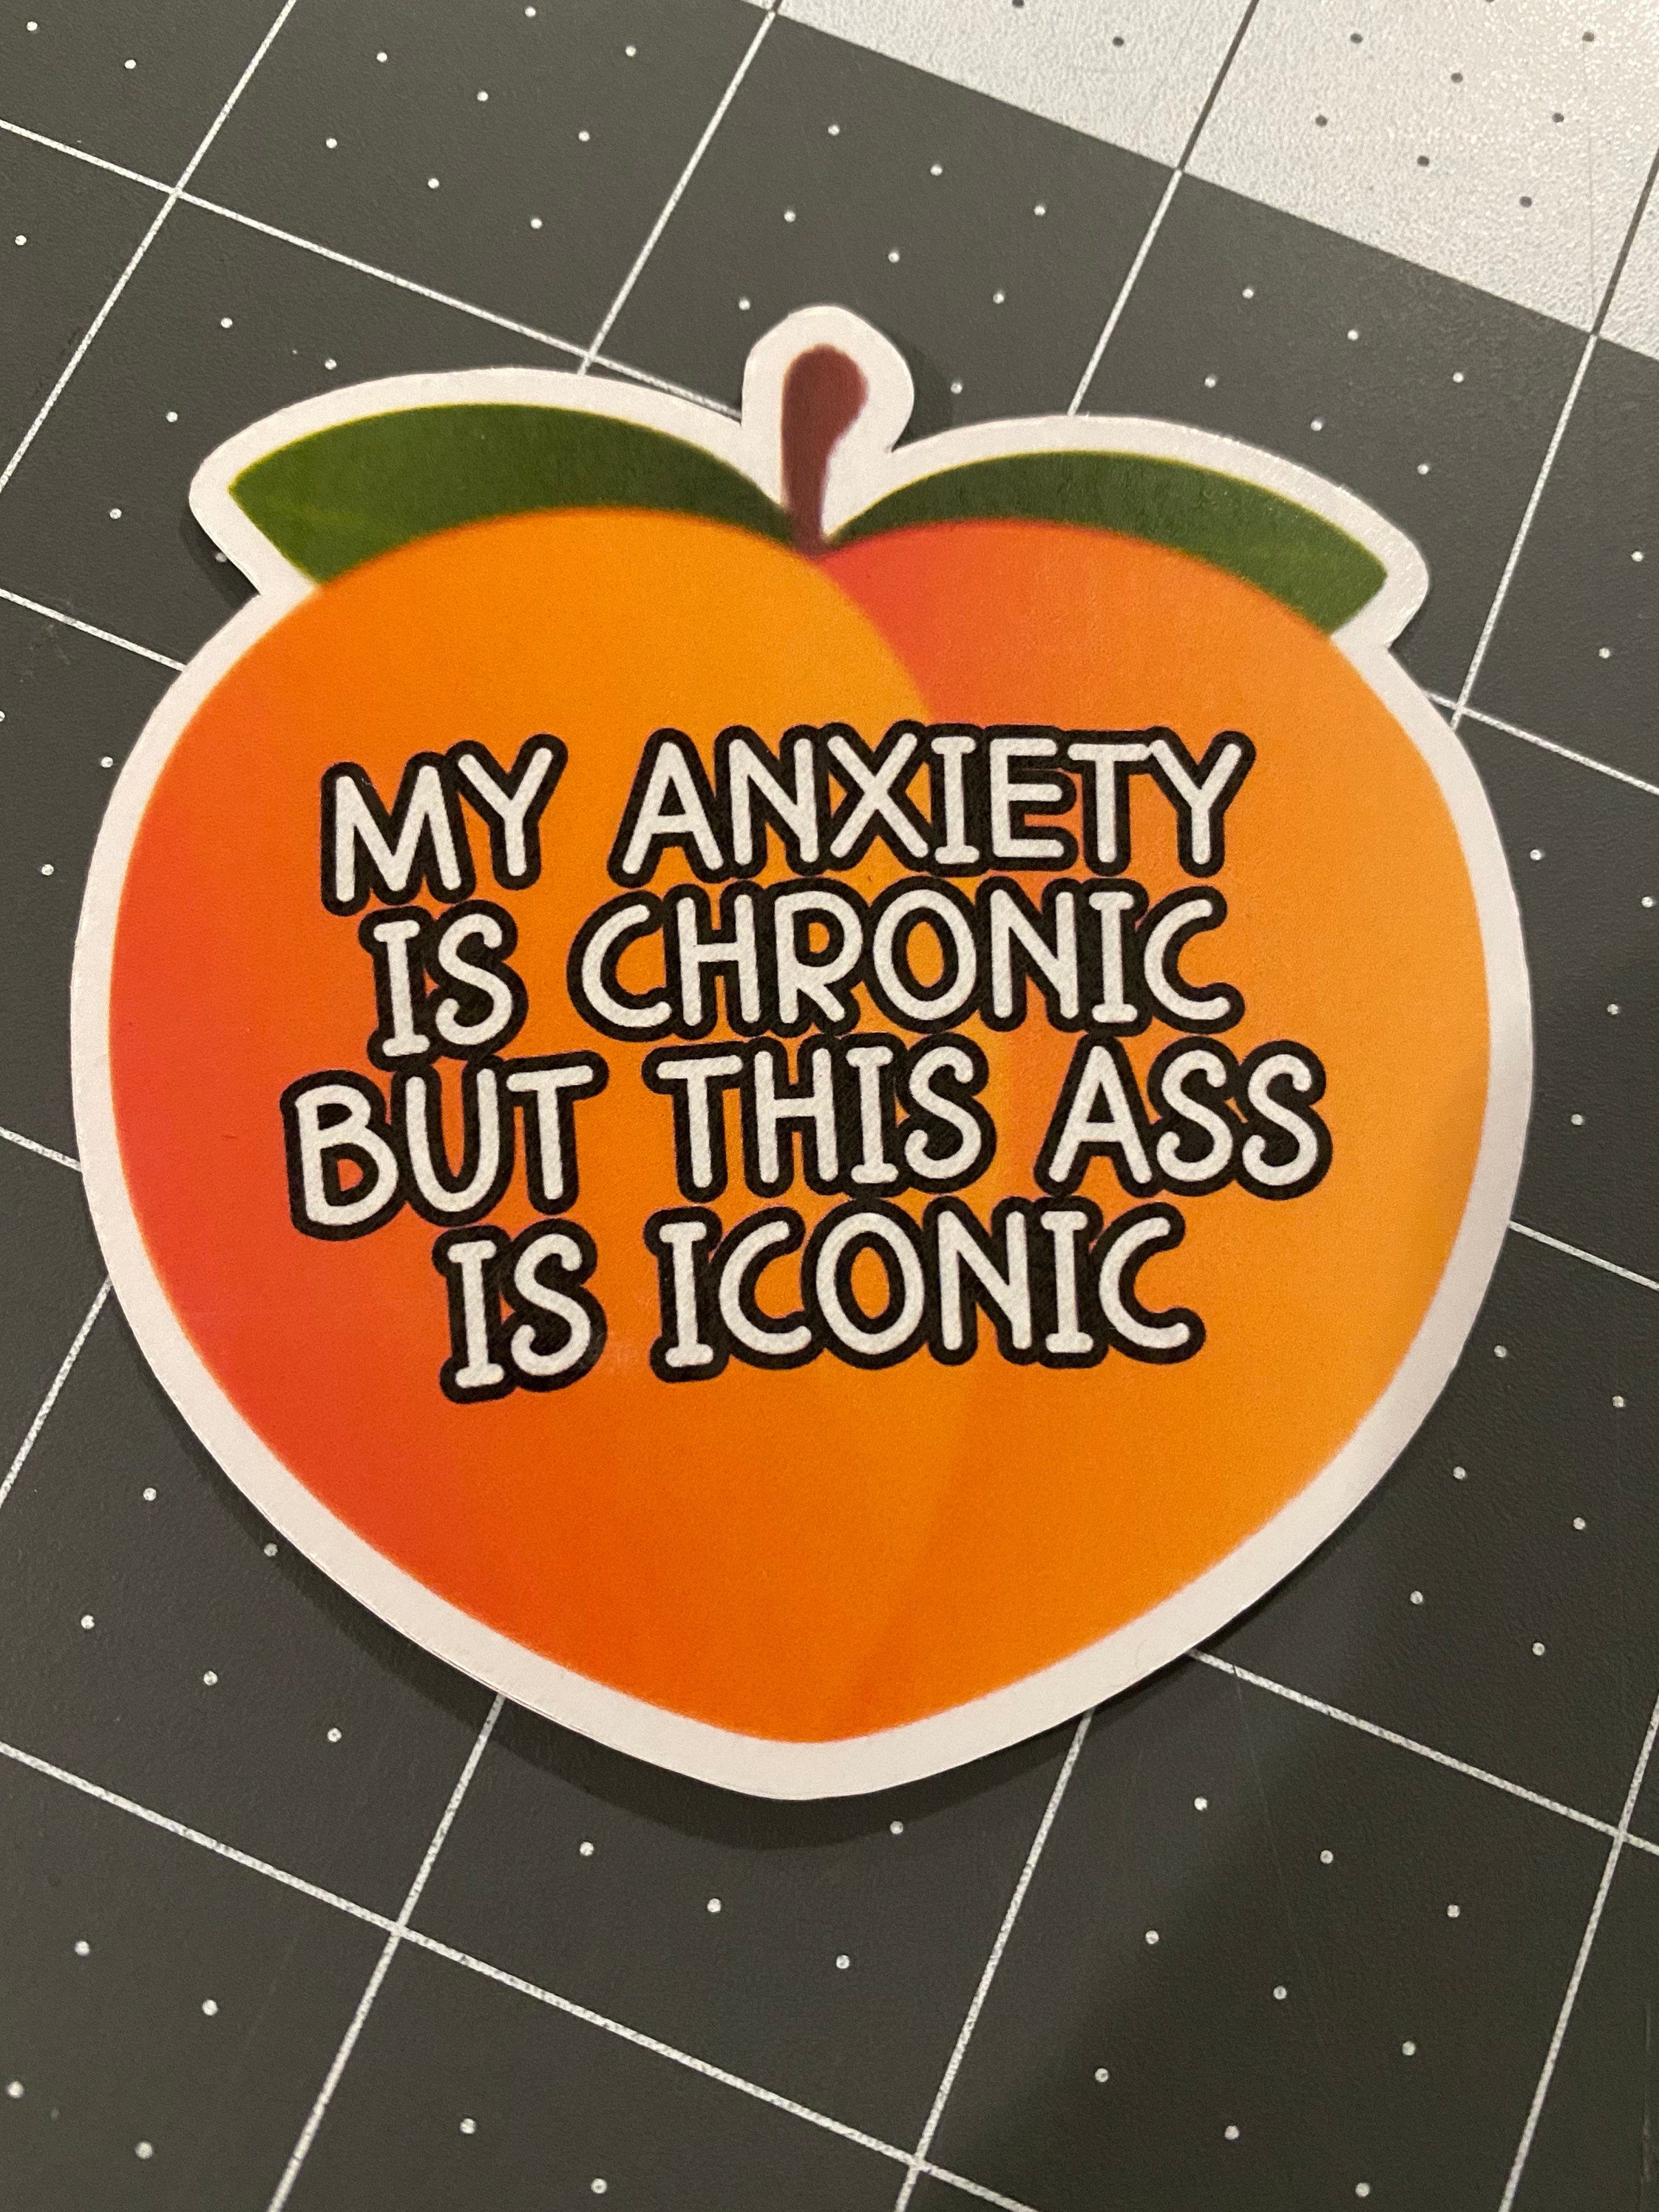 My Anxiety Is Chronic But This Ass Is Iconic | Funny Peach Booty Car Truck  Tumbler Water Bottle Laptop | Laminated Vinyl Decal Sticker